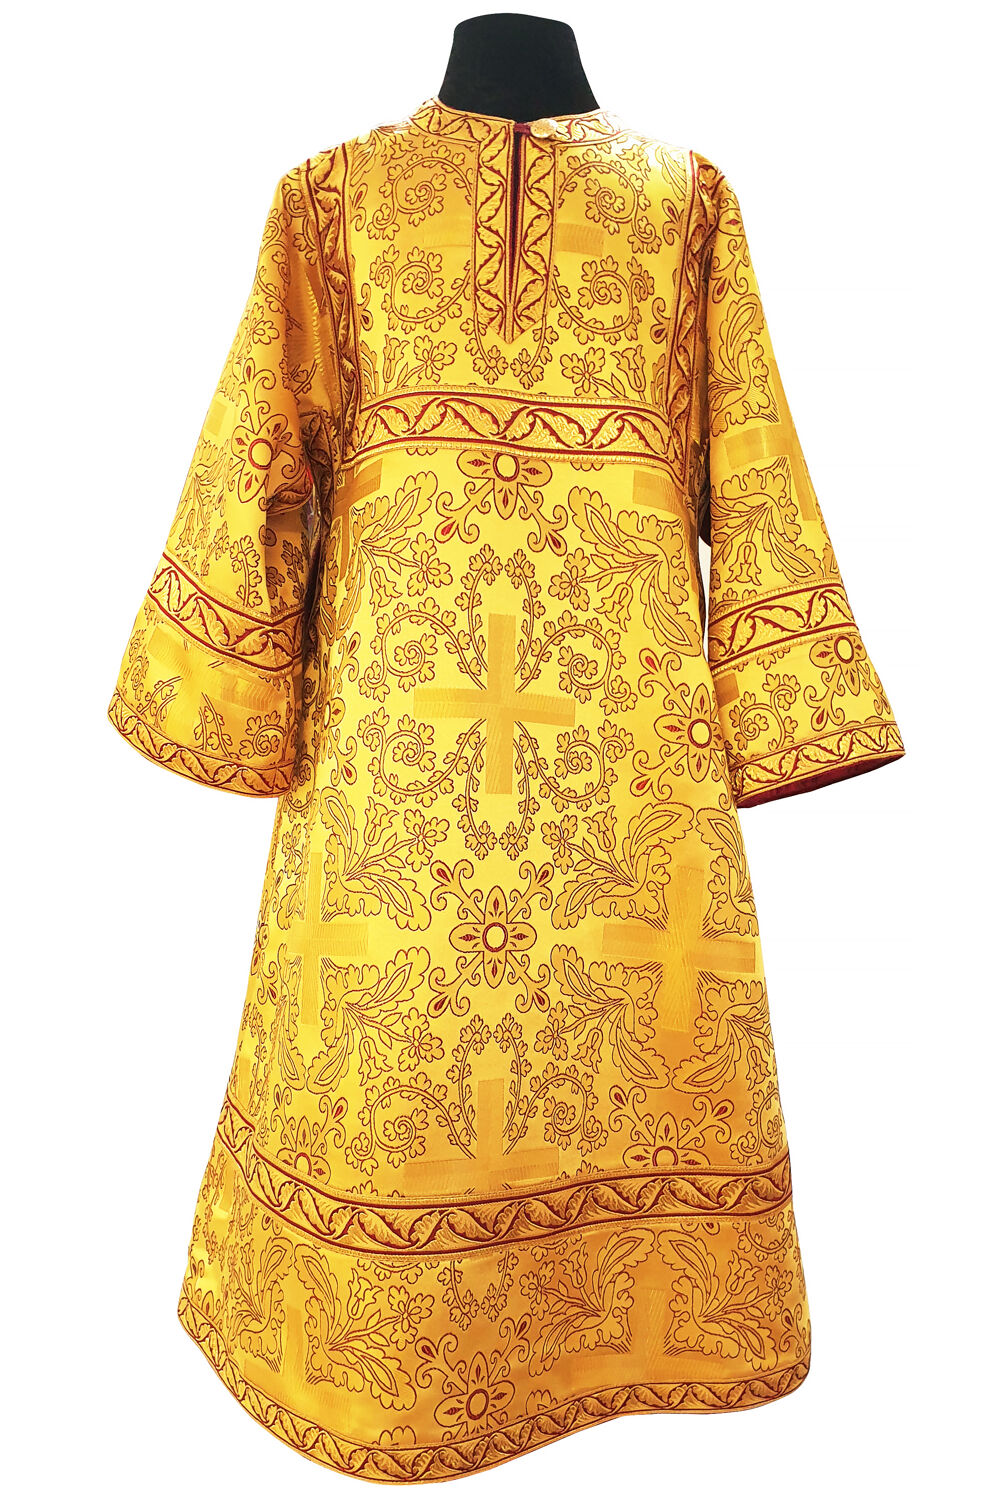 Altar Boy Sticharion yellow. For kids' height 110-128cm (42-51'')